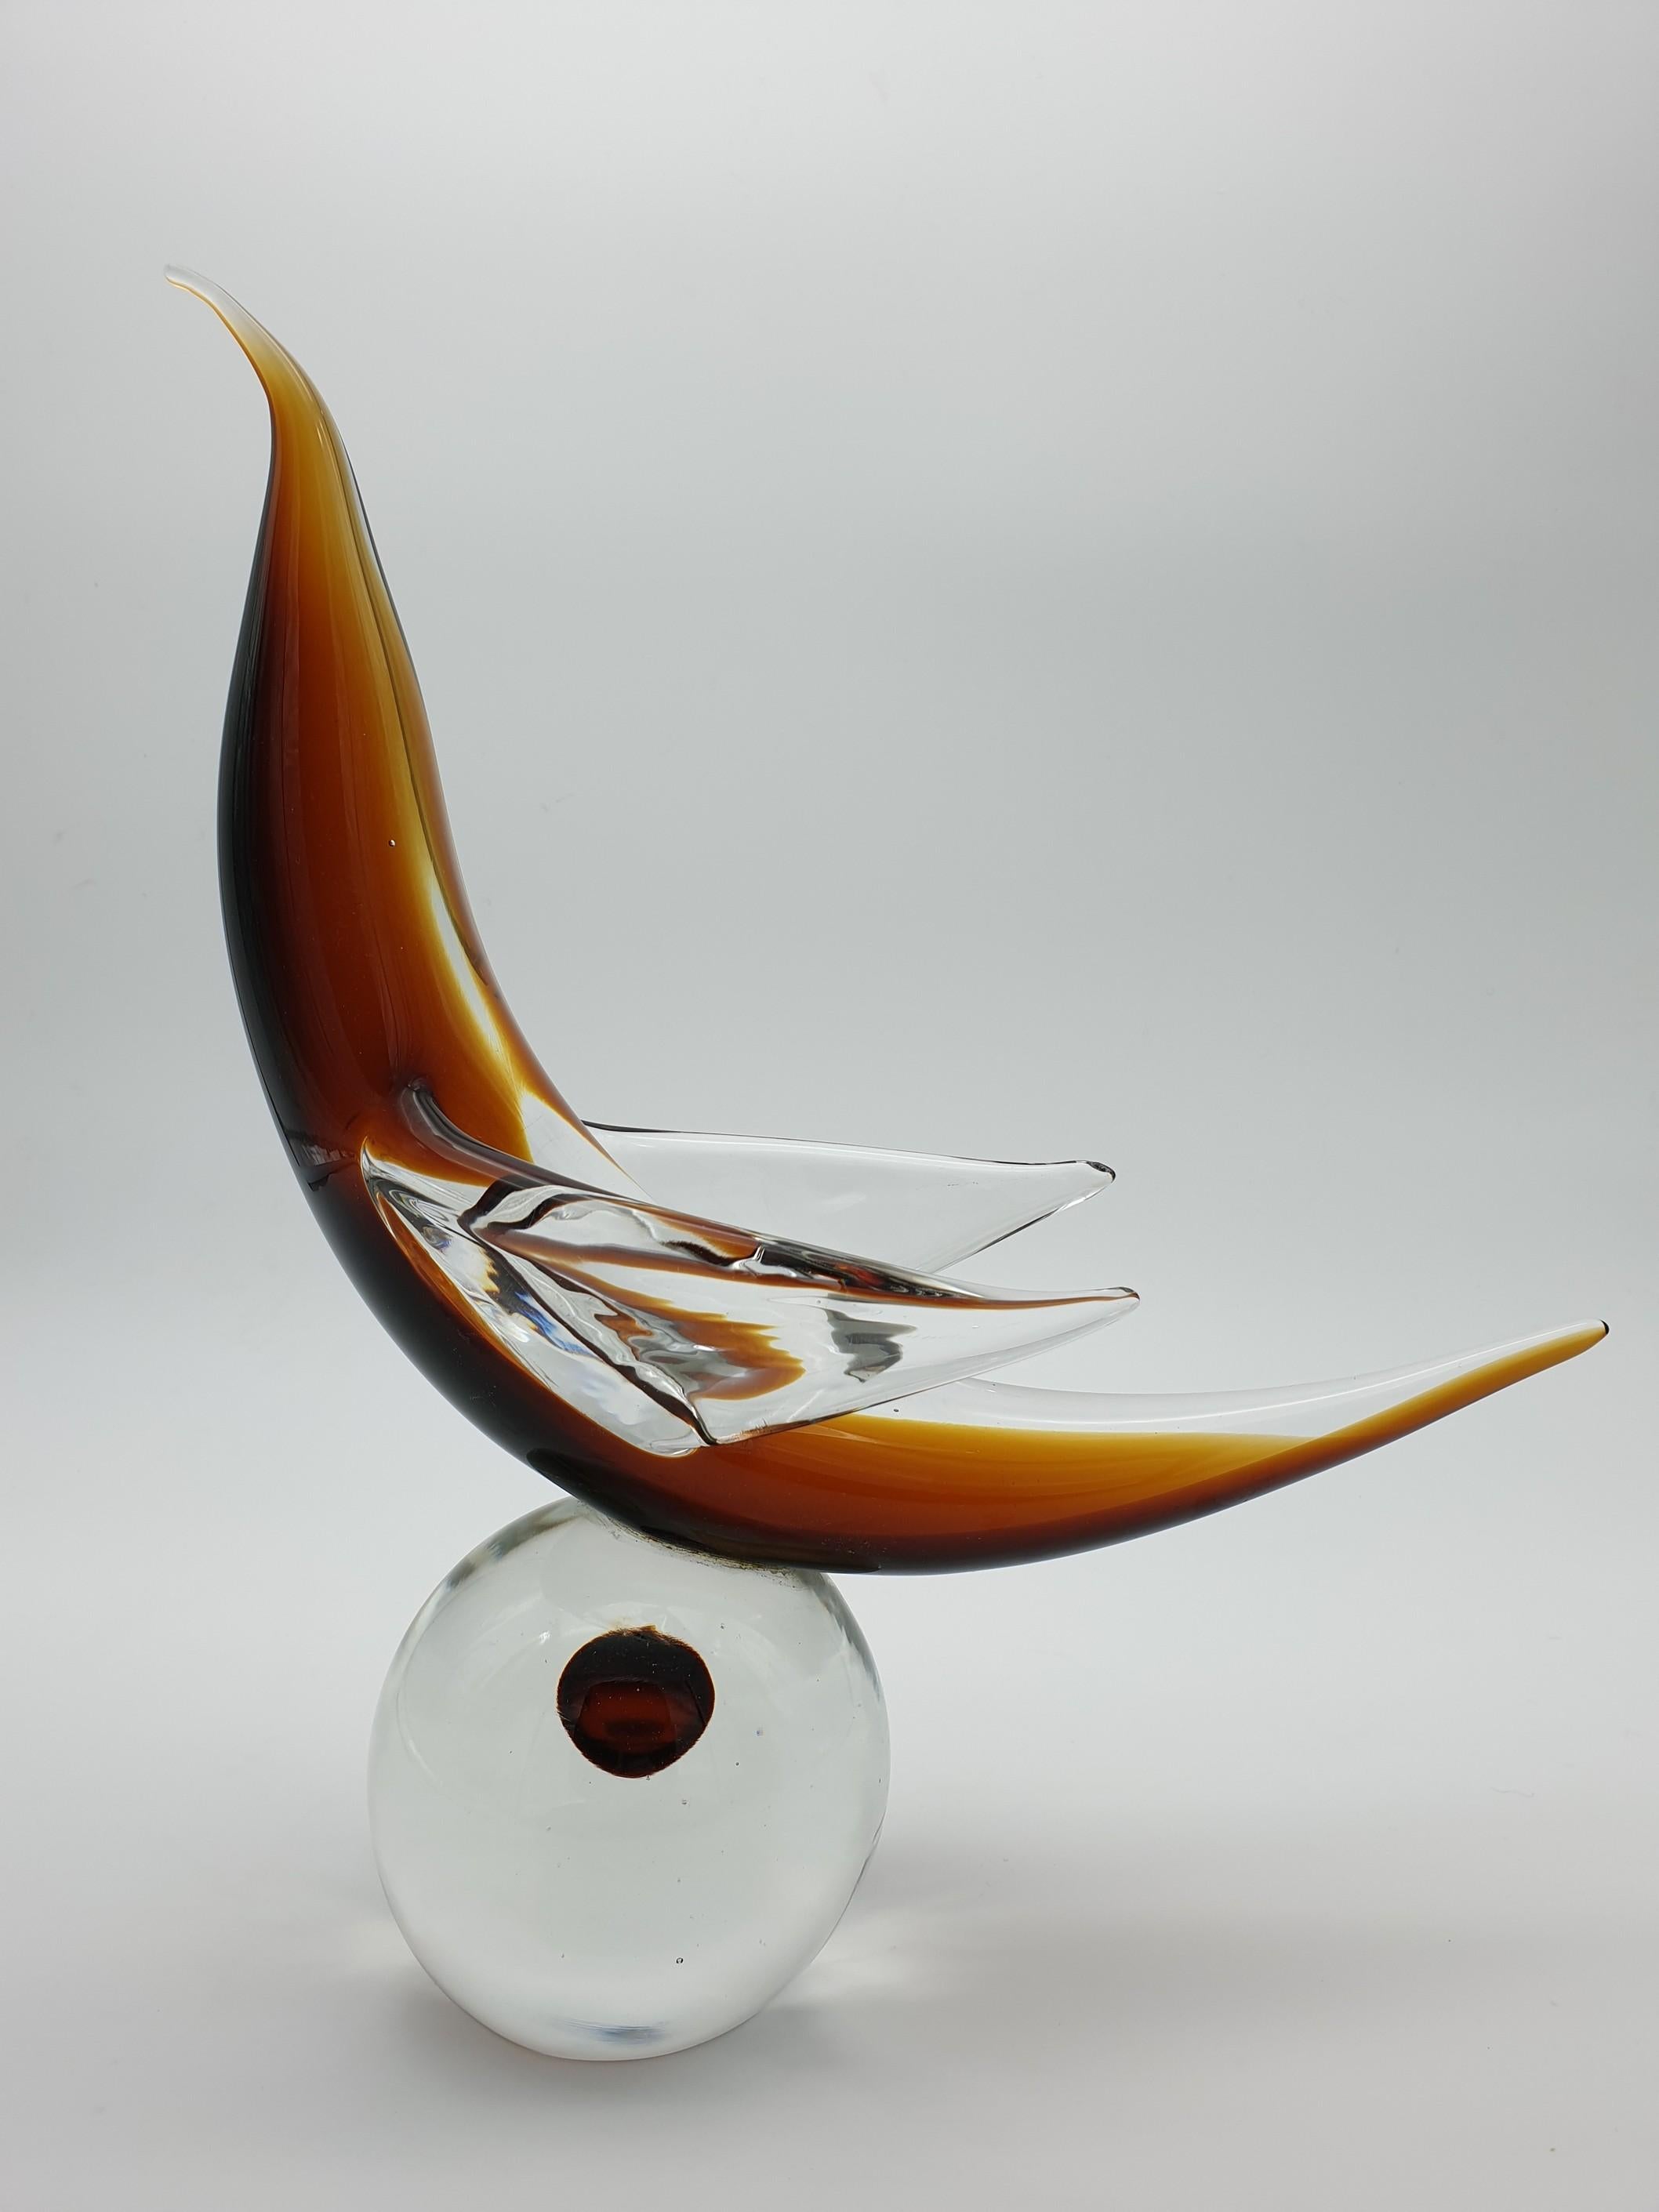 Hand-Crafted Modern Futuristic Murano Glass Sculpture by Cenedese, circa 1970s For Sale